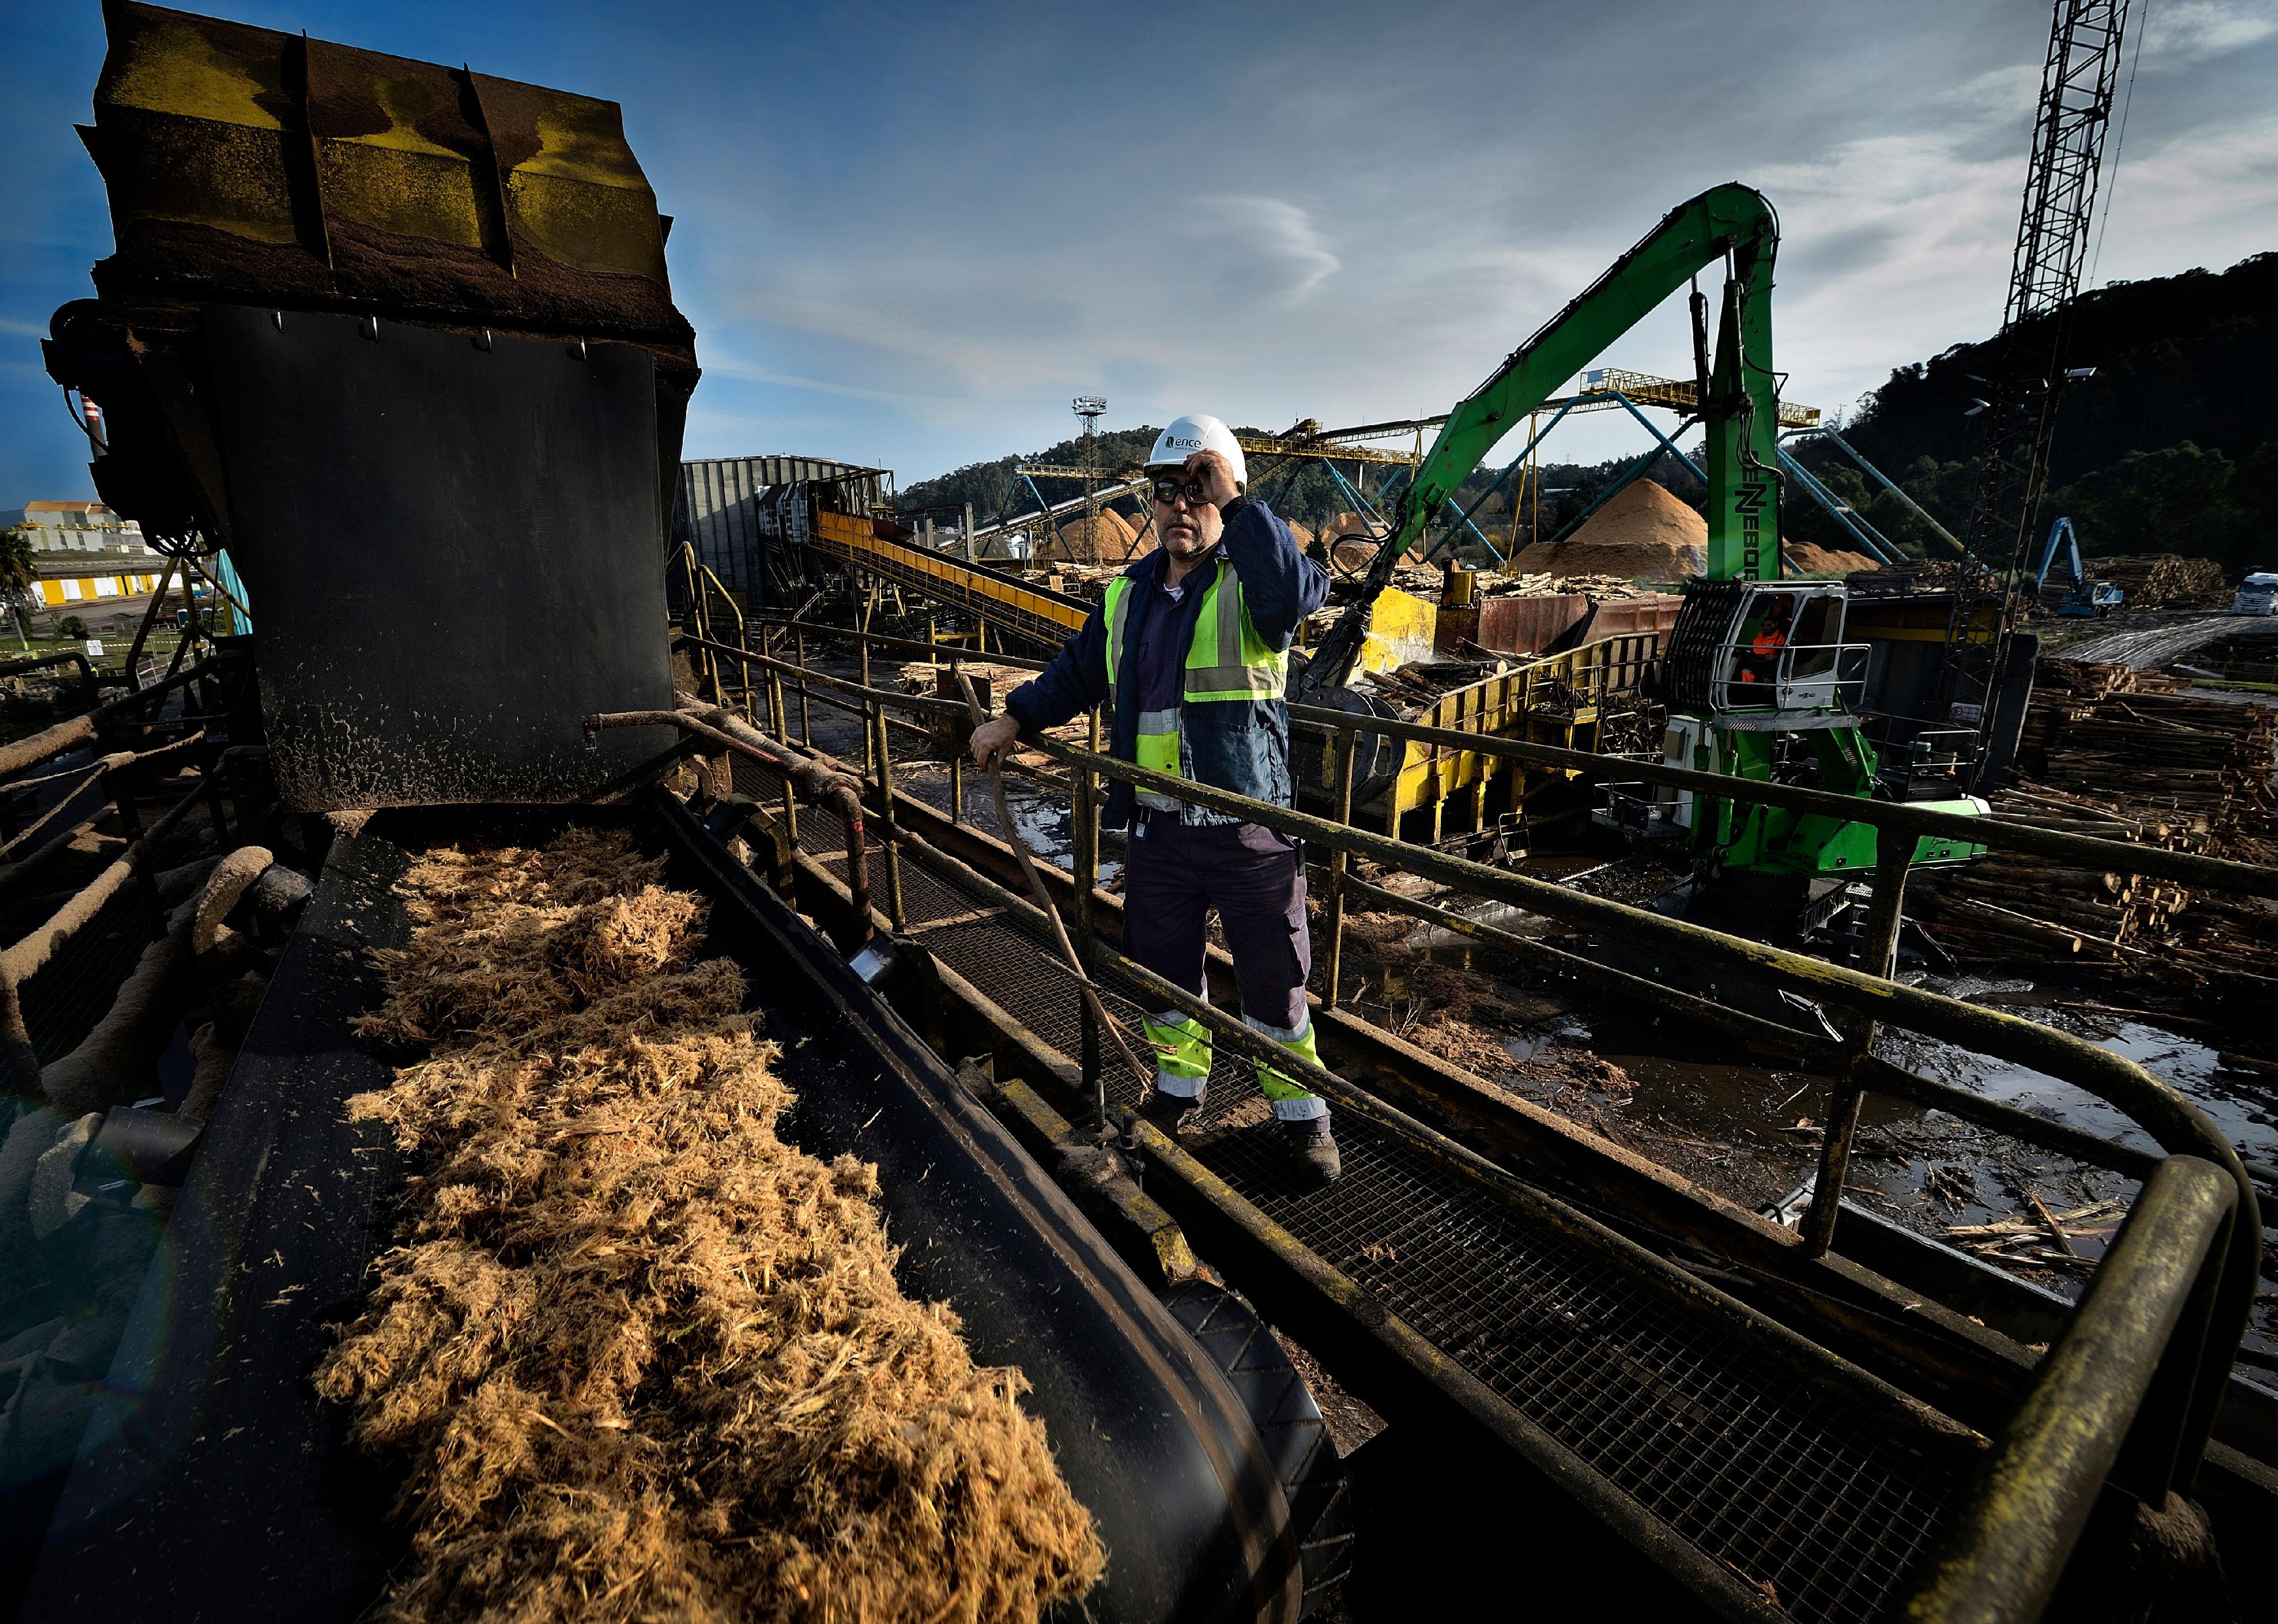 A worker checks the biomass line at a plant in Spain.